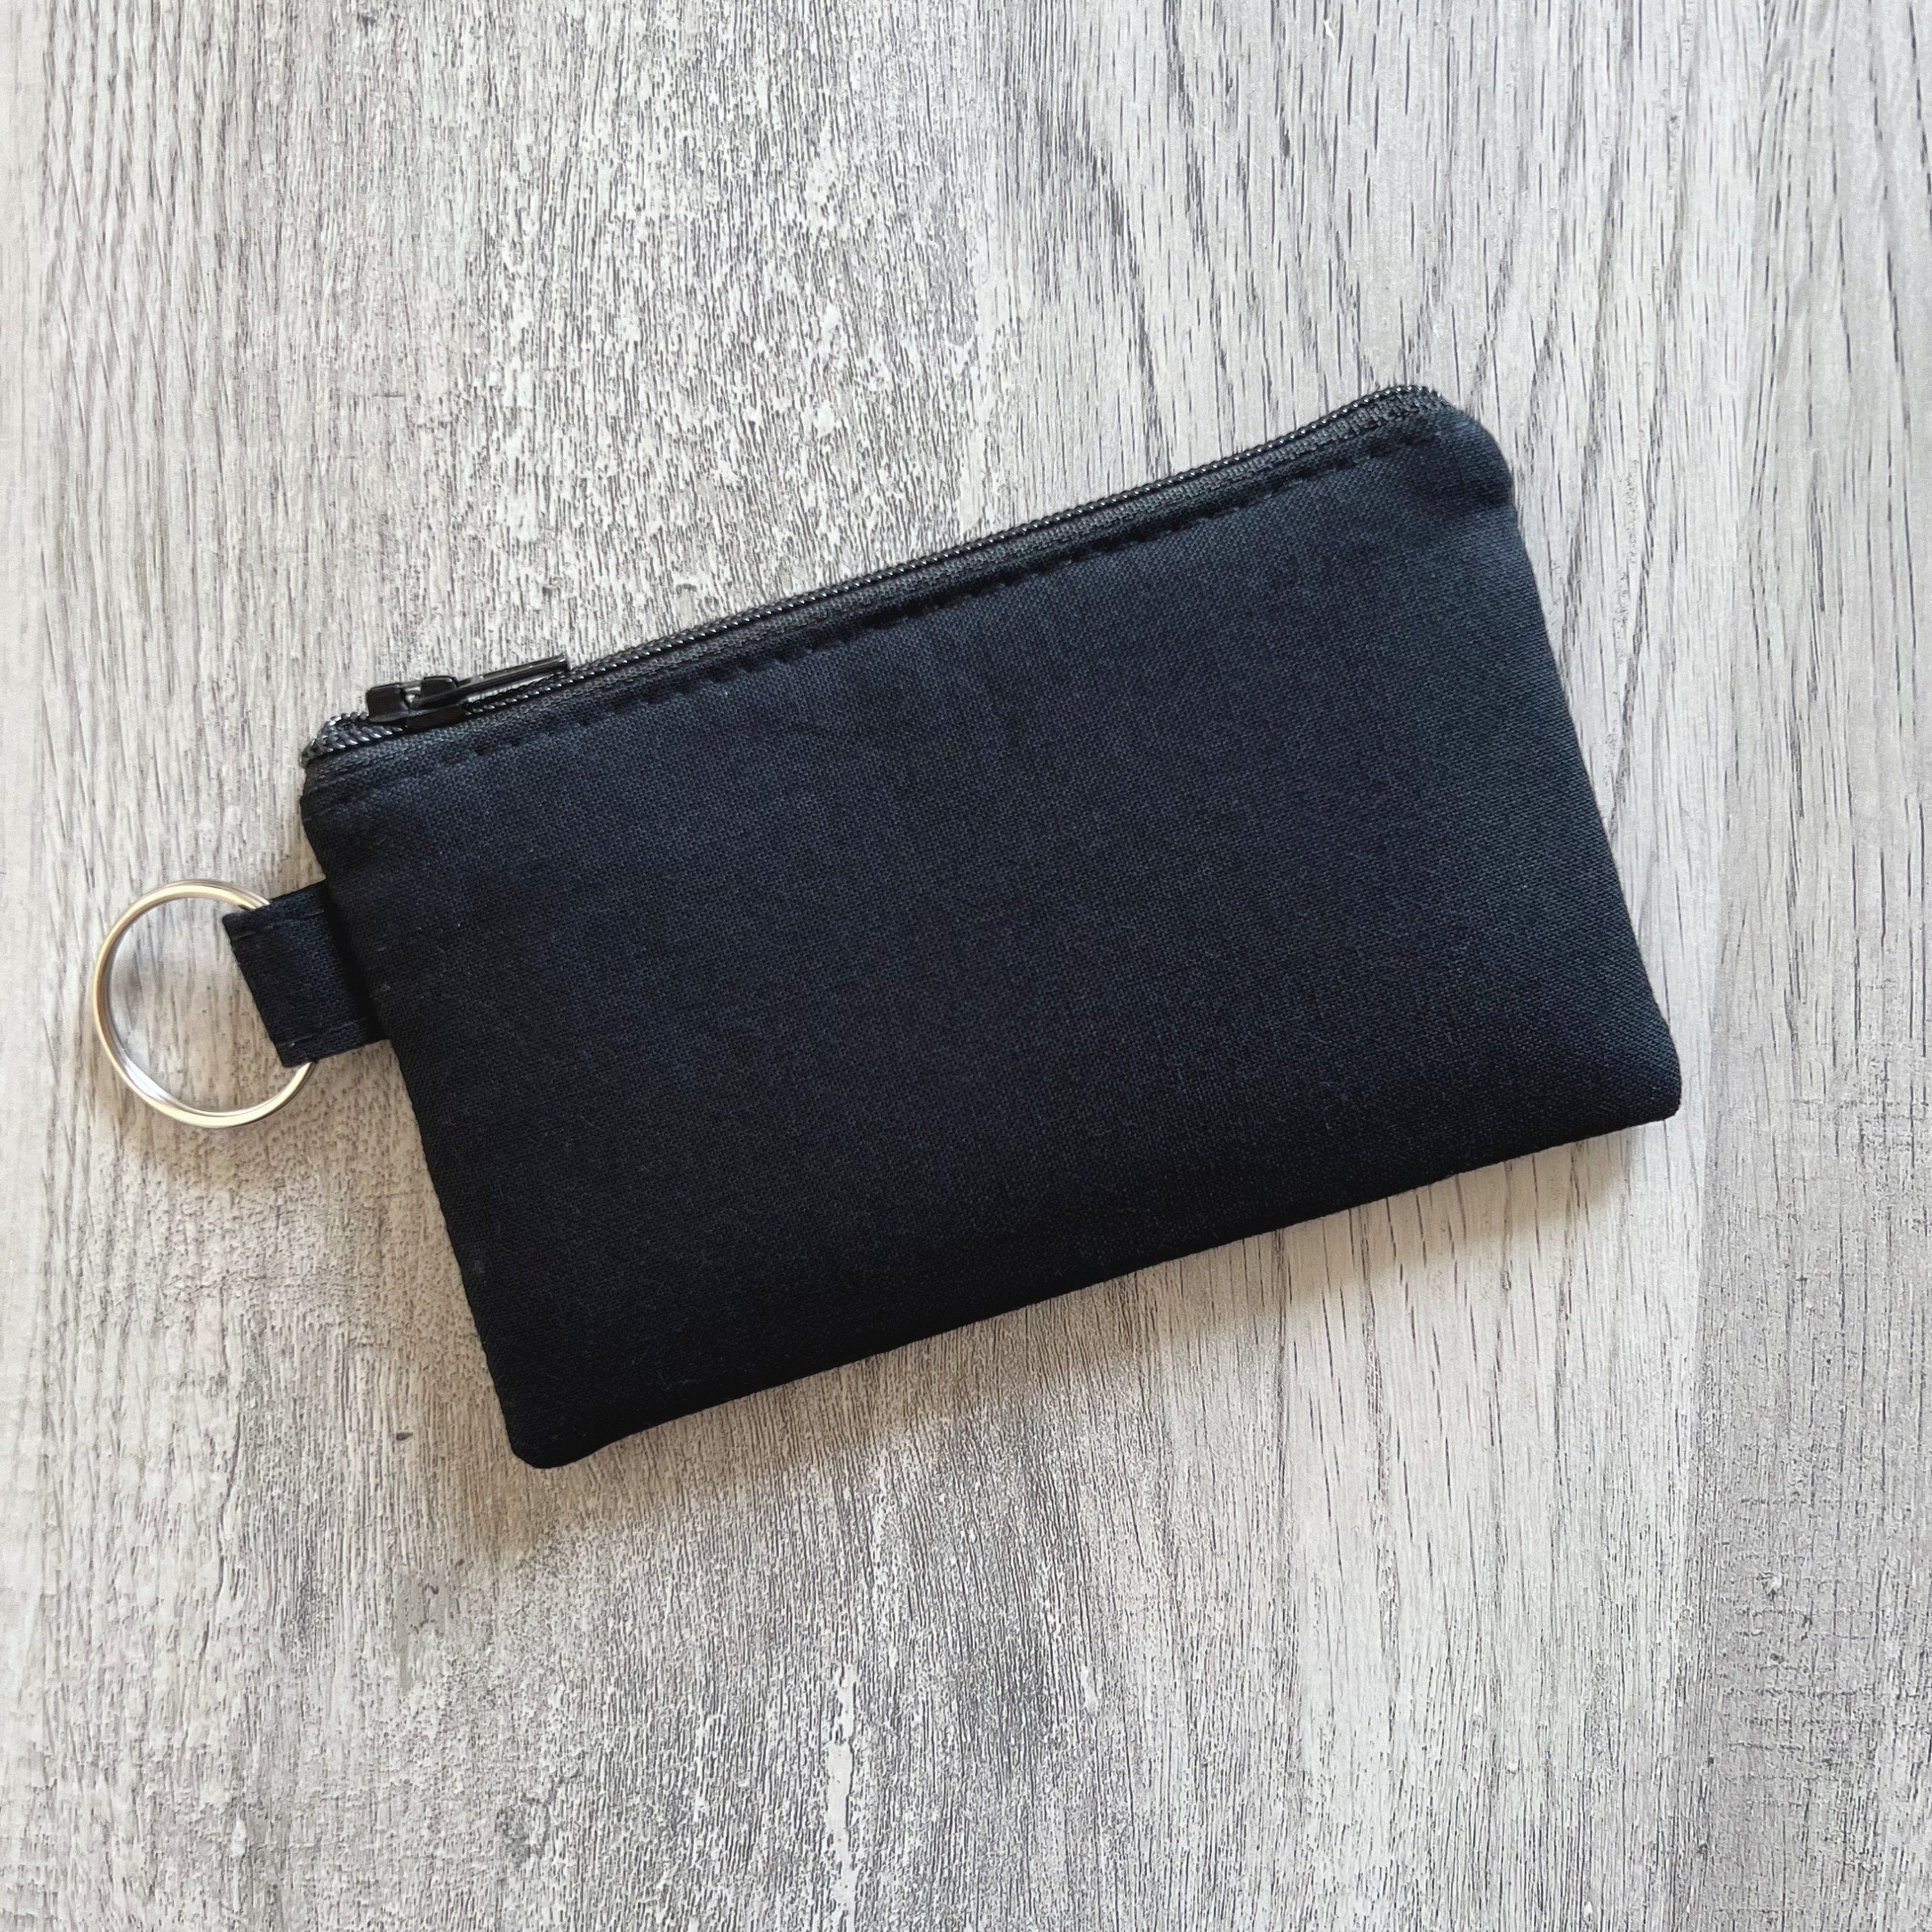 FUFU Zippered Credit Card Holder Key Ring Coin Purse Soft 